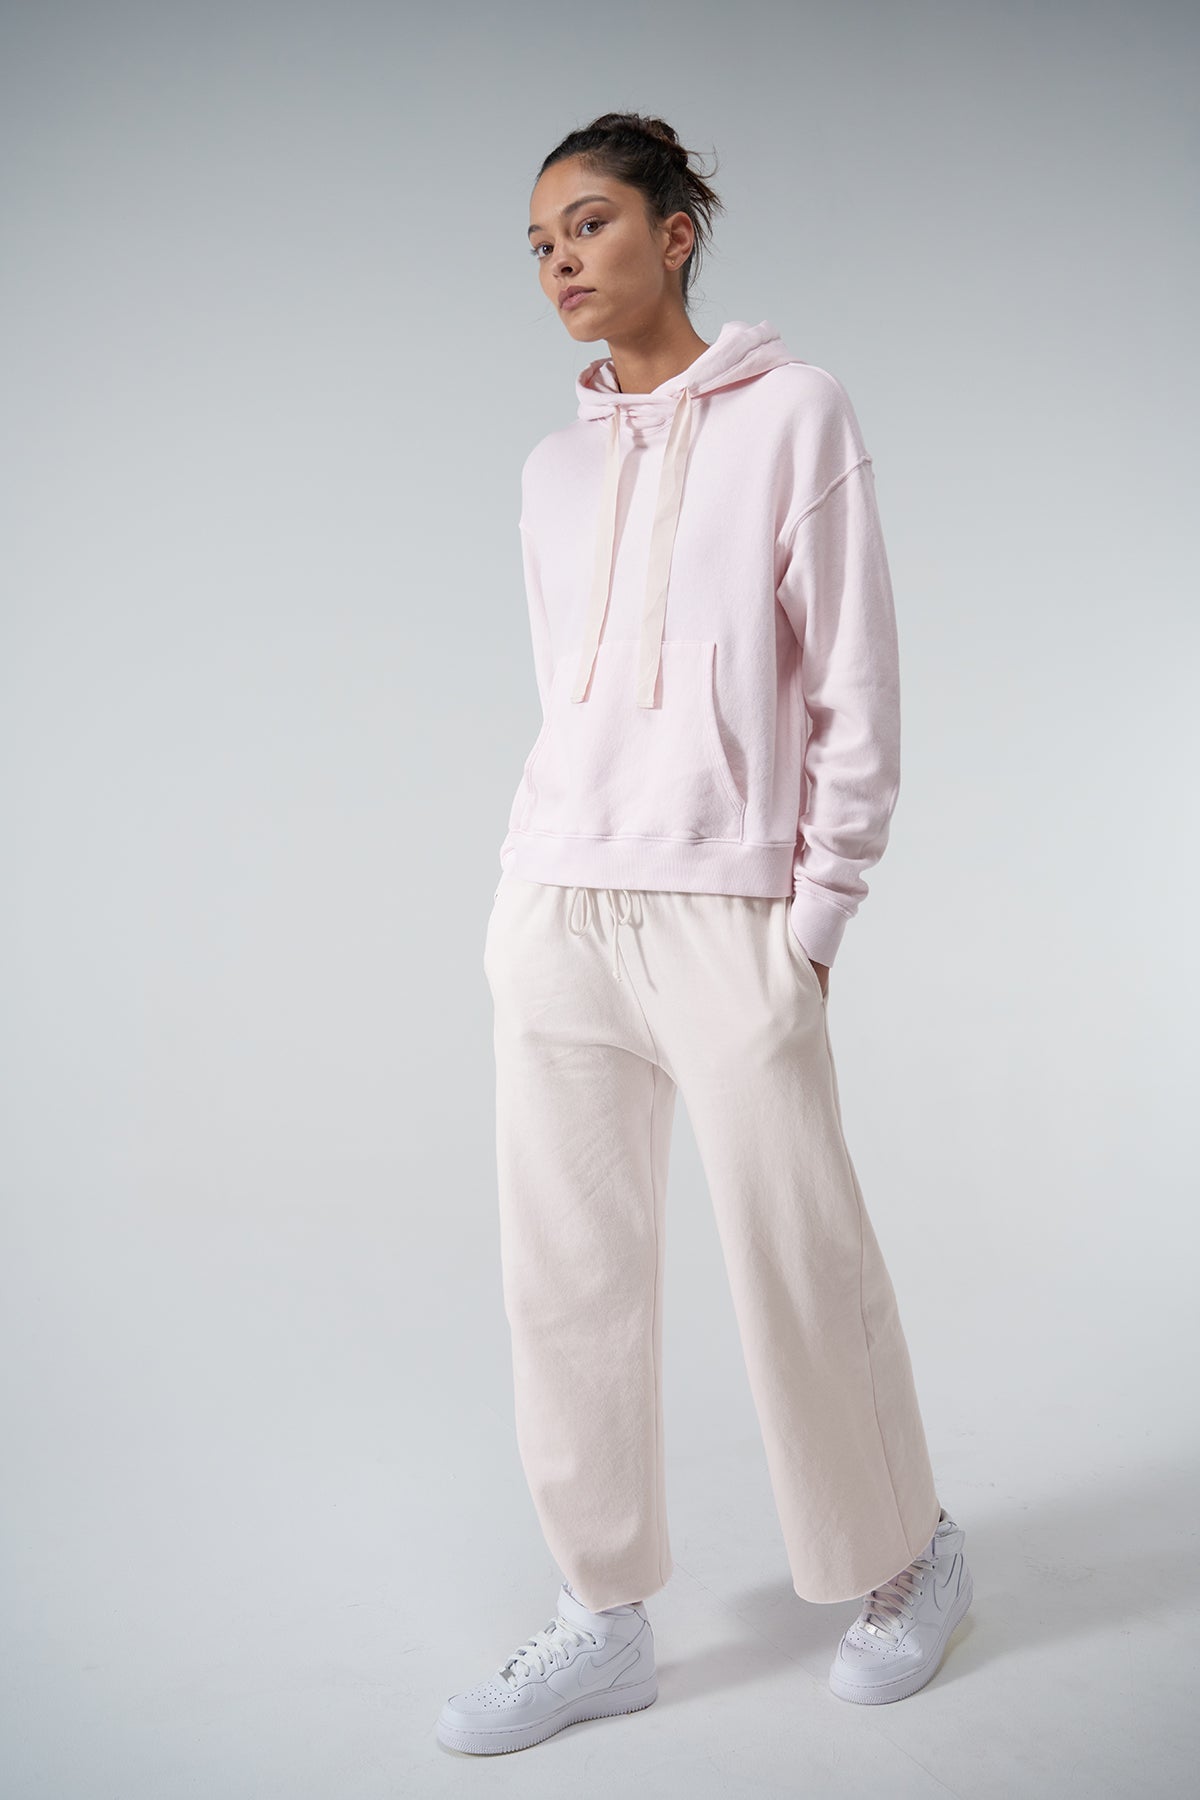 Ojai Hoodie Pale Pink with Montecito Sweatpant Beach Front & Side-24063818694849